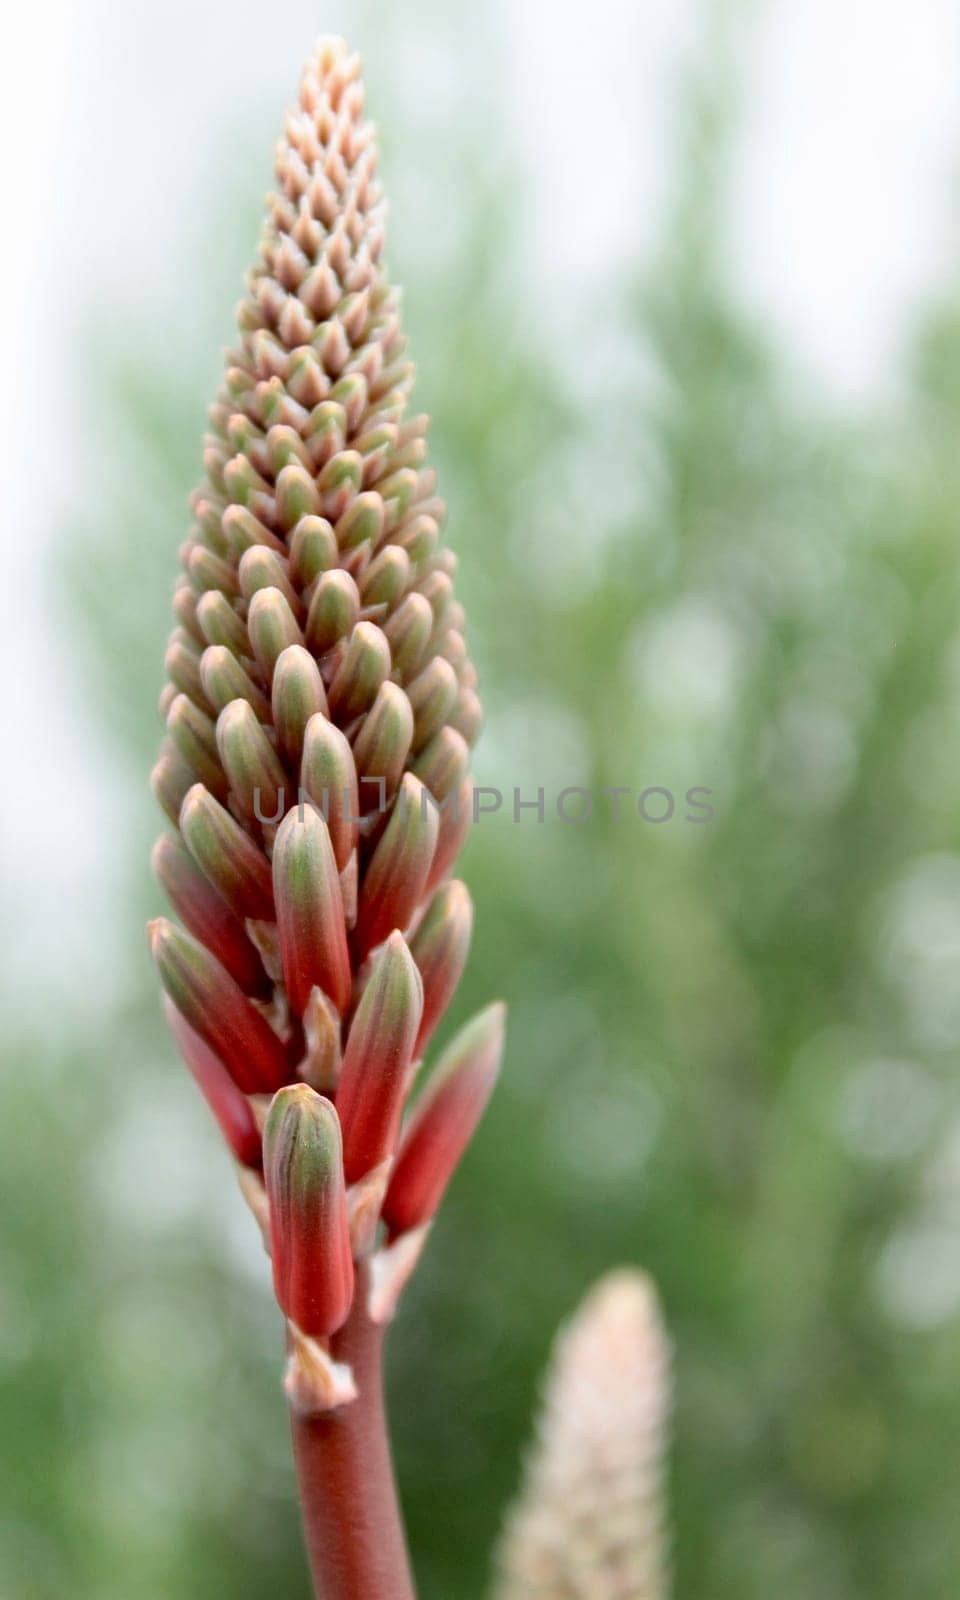 A large red flower of the aloe vera plant has blossomed. High quality photo